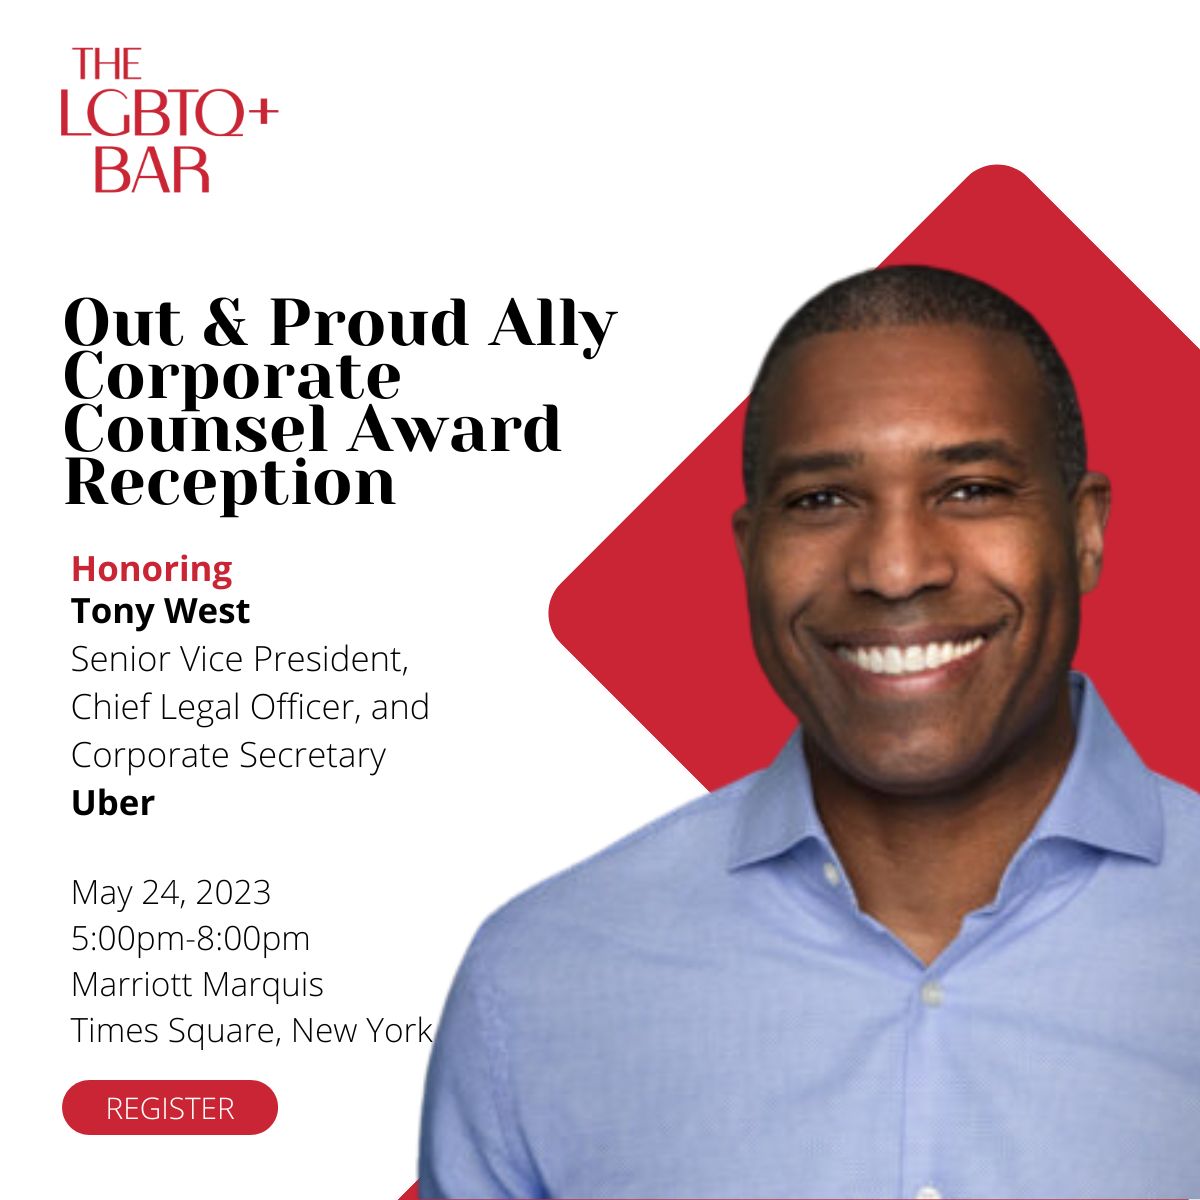 Out & Proud Corporate Counsel Award Reception for Tony West - click for details